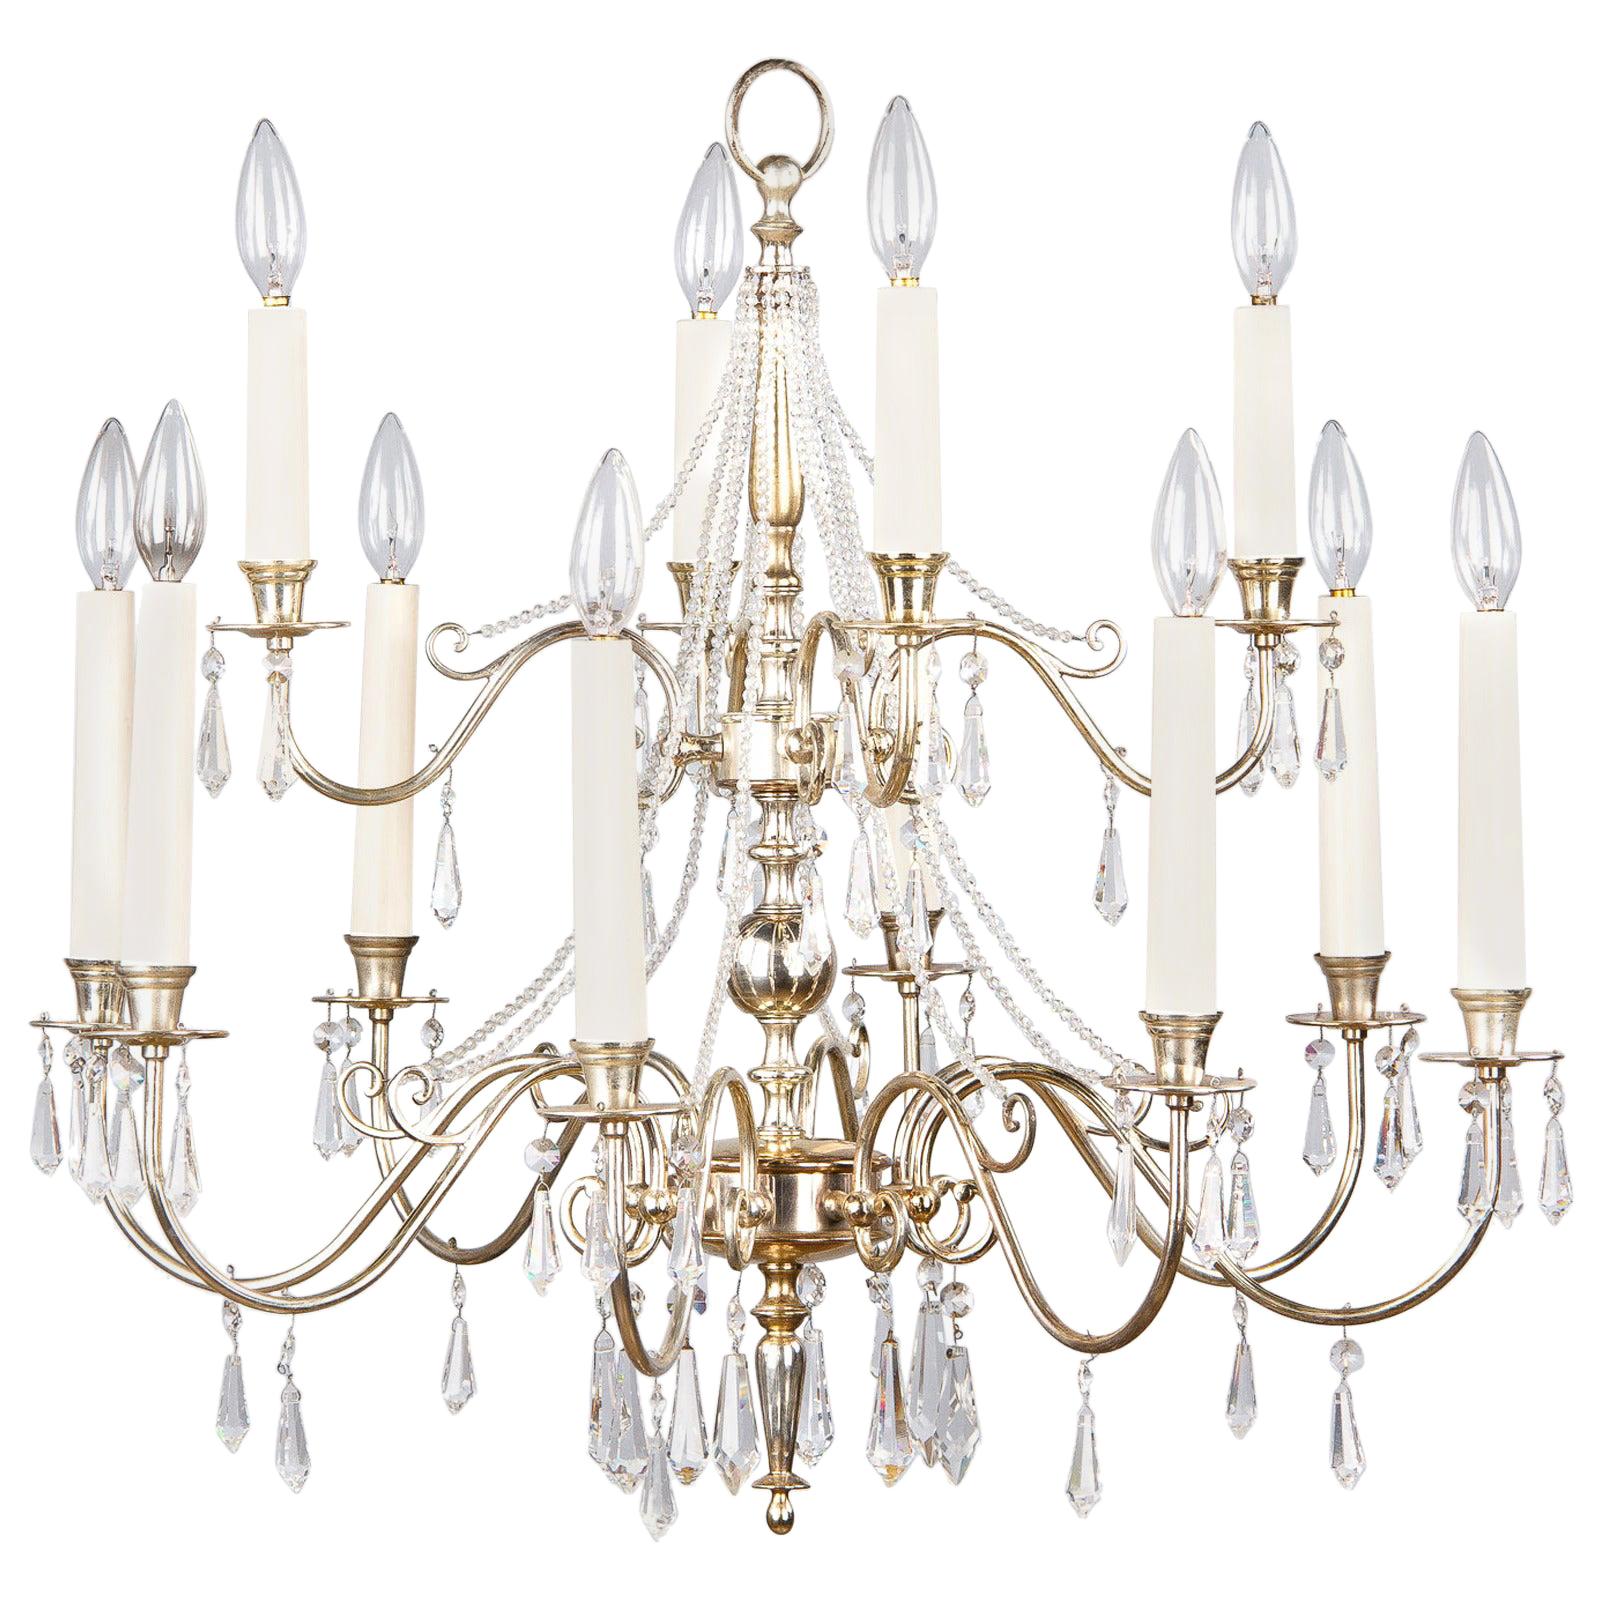 French Midcentury Silver Plated Chandelier with Crystals, 1950s